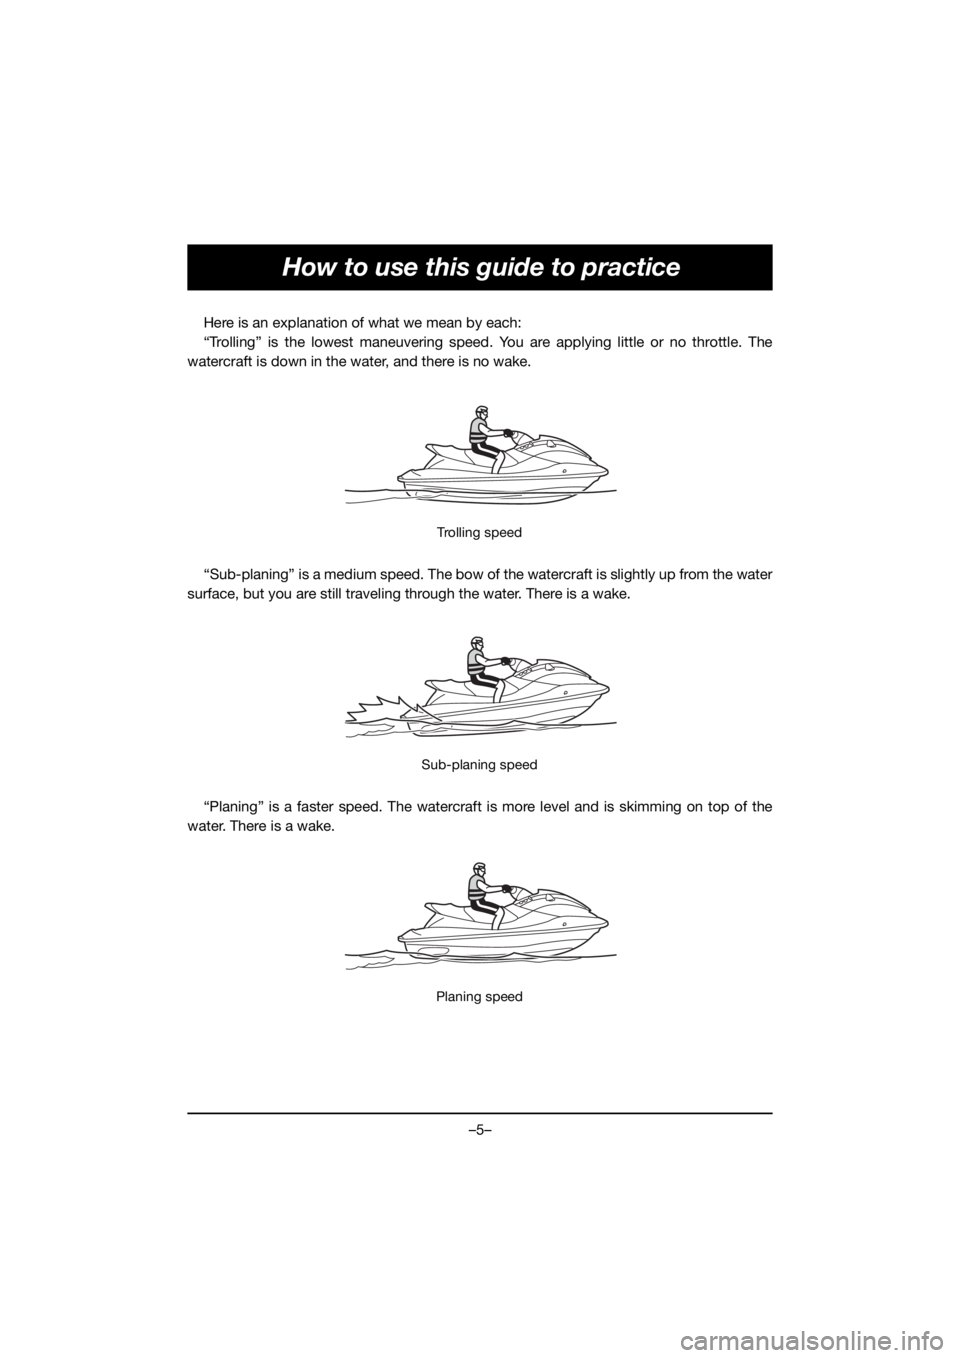 YAMAHA GP1800R SVHO 2020  Manuale de Empleo (in Spanish) –5–
How to use this guide to practice
Here is an explanation of what we mean by each:
“Trolling” is the lowest maneuvering speed. You are applying little or no throttle. The
watercraft is down